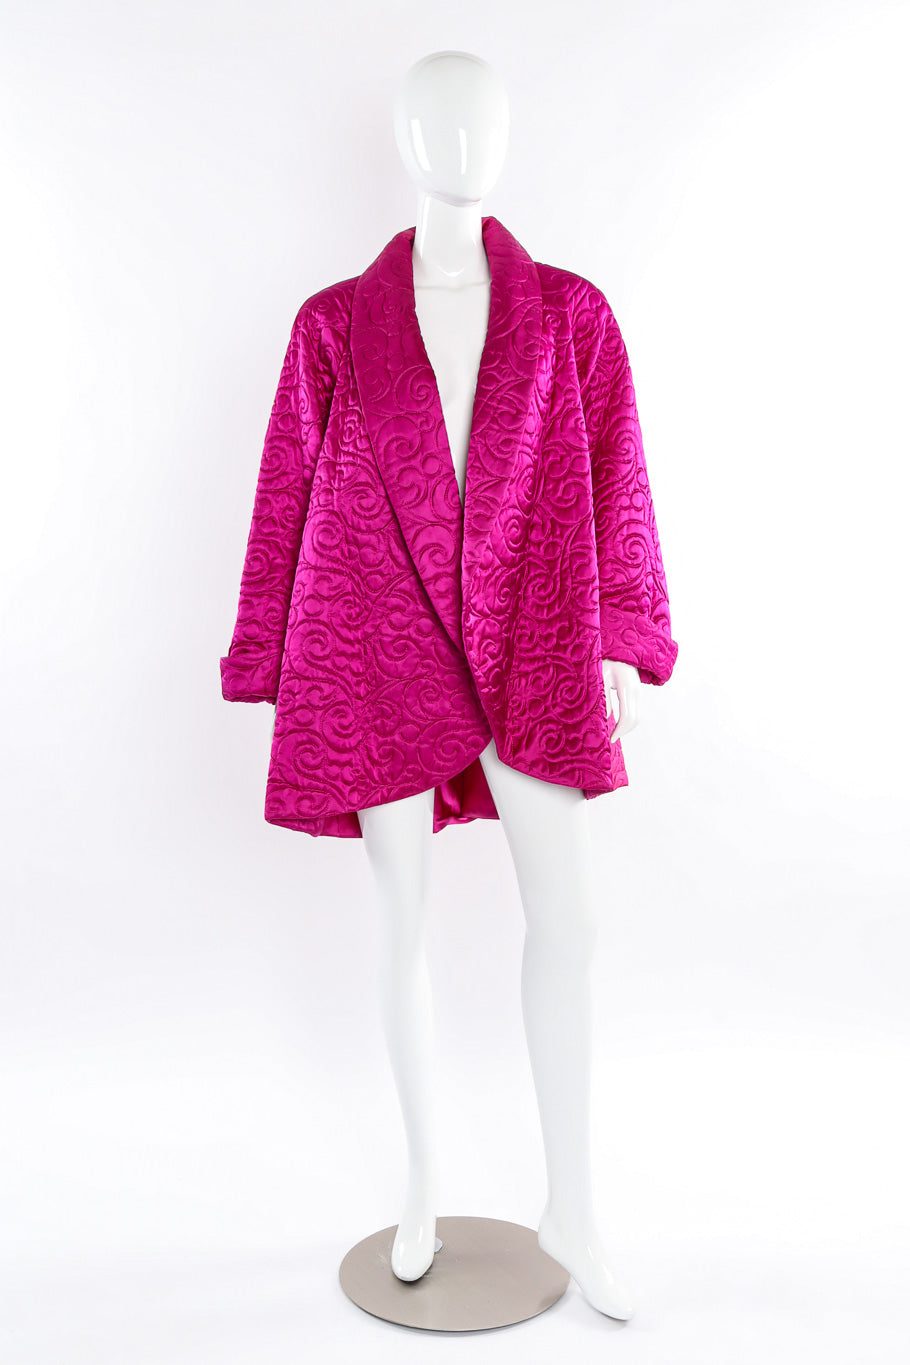 Plush oversized swirl quilted swing coat by Farinae Collection mannequin front full view @recessla